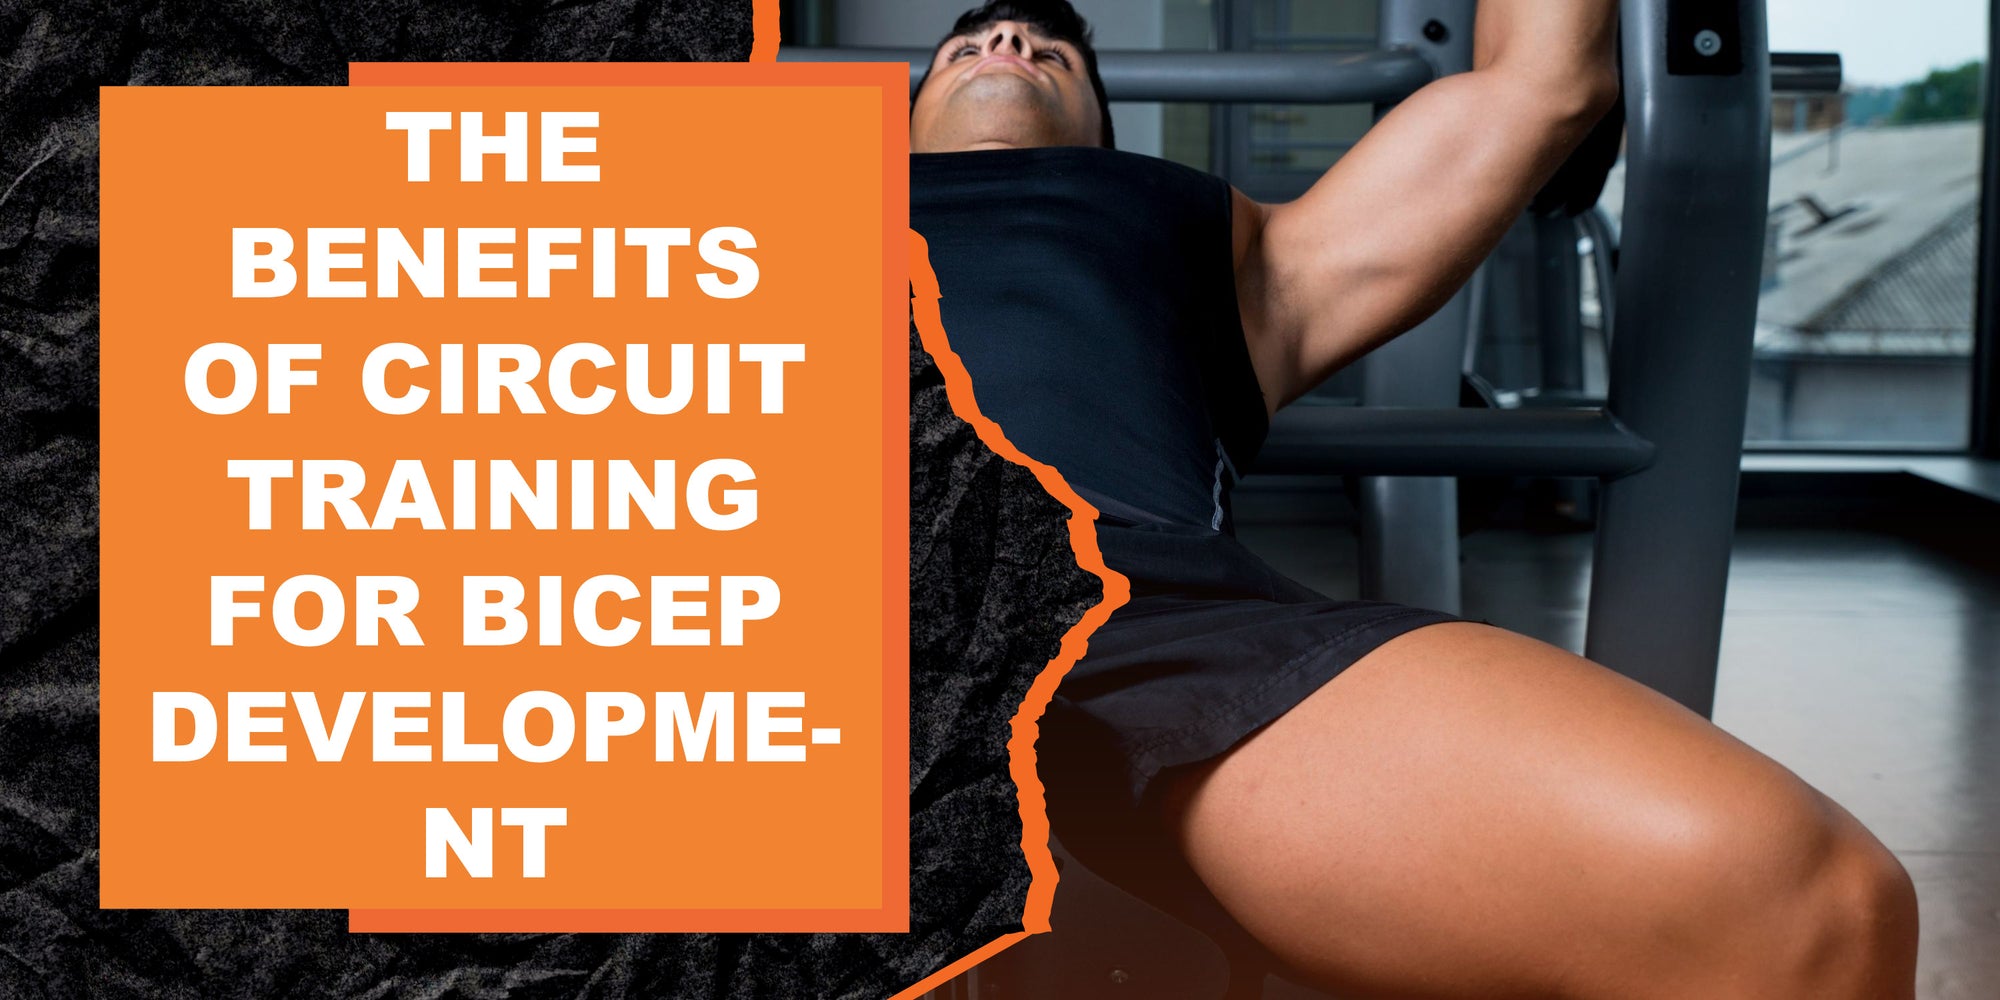 The Benefits of Circuit Training for Bicep Development